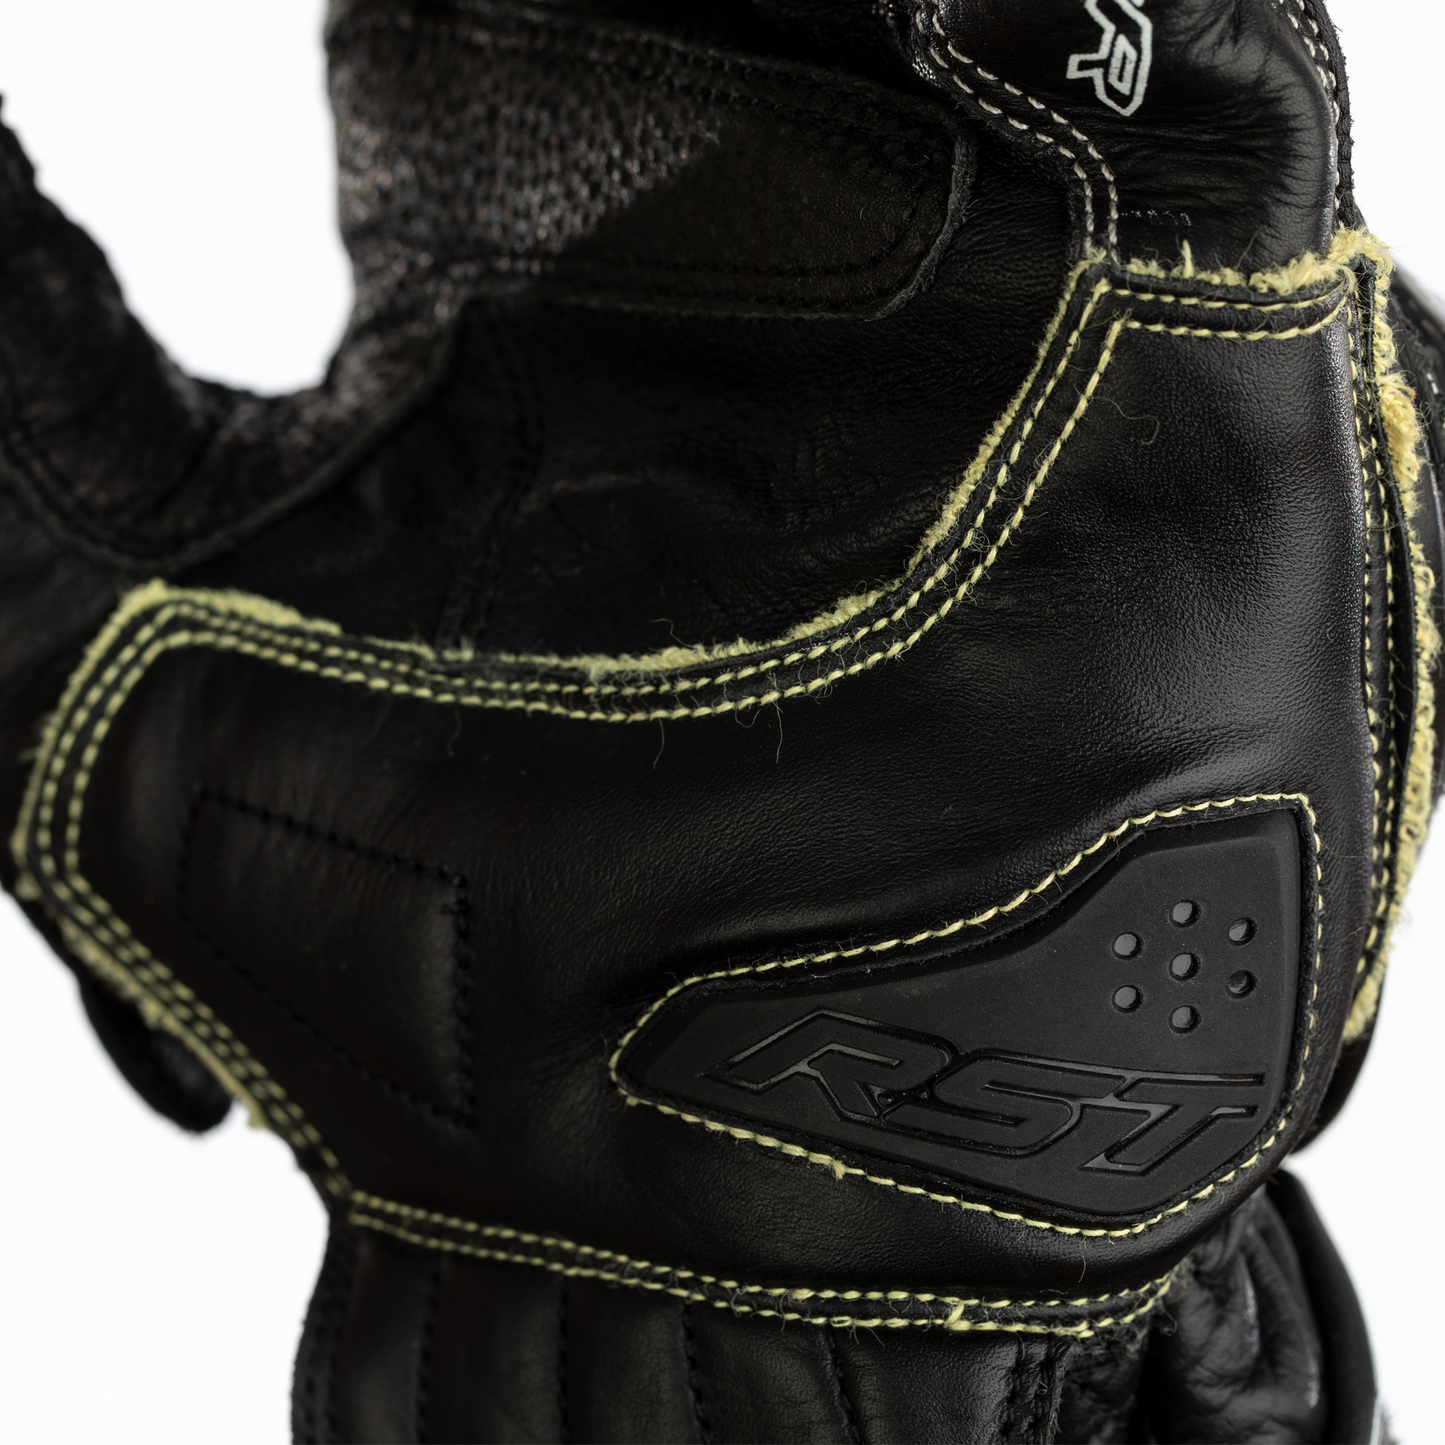 RST Tractech Evo R Riding Gloves - CE Approved - Black